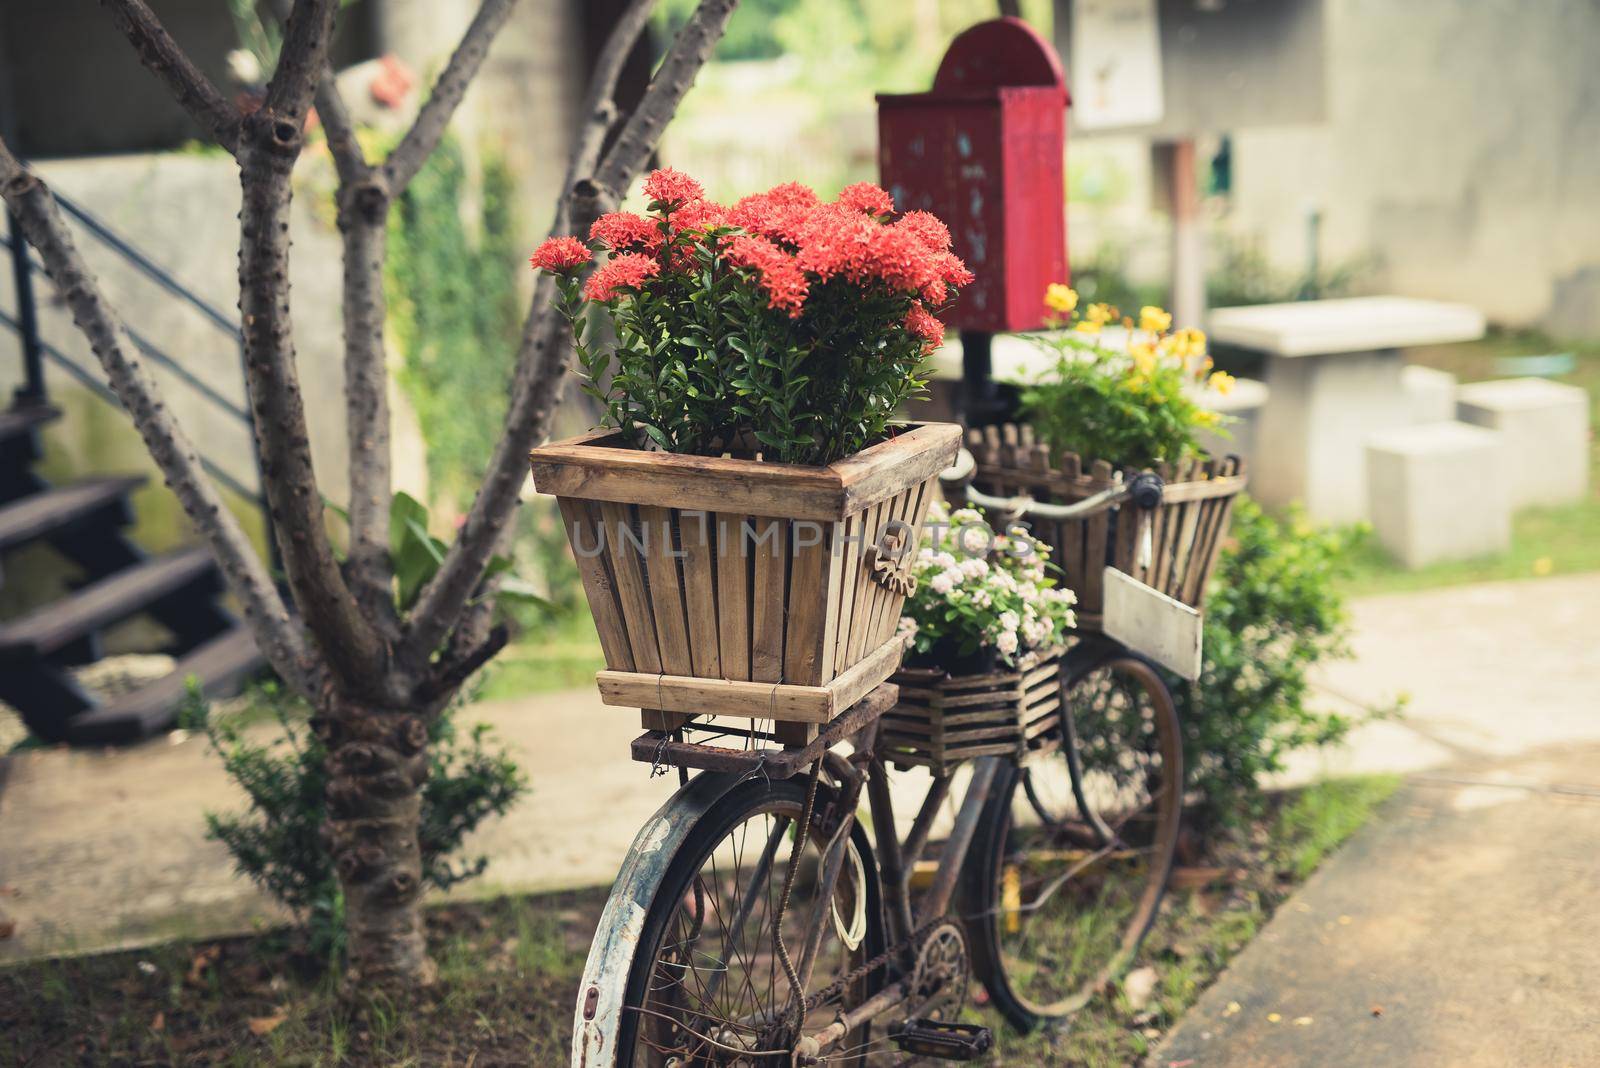 Vintage bicycle with flowers by Wmpix